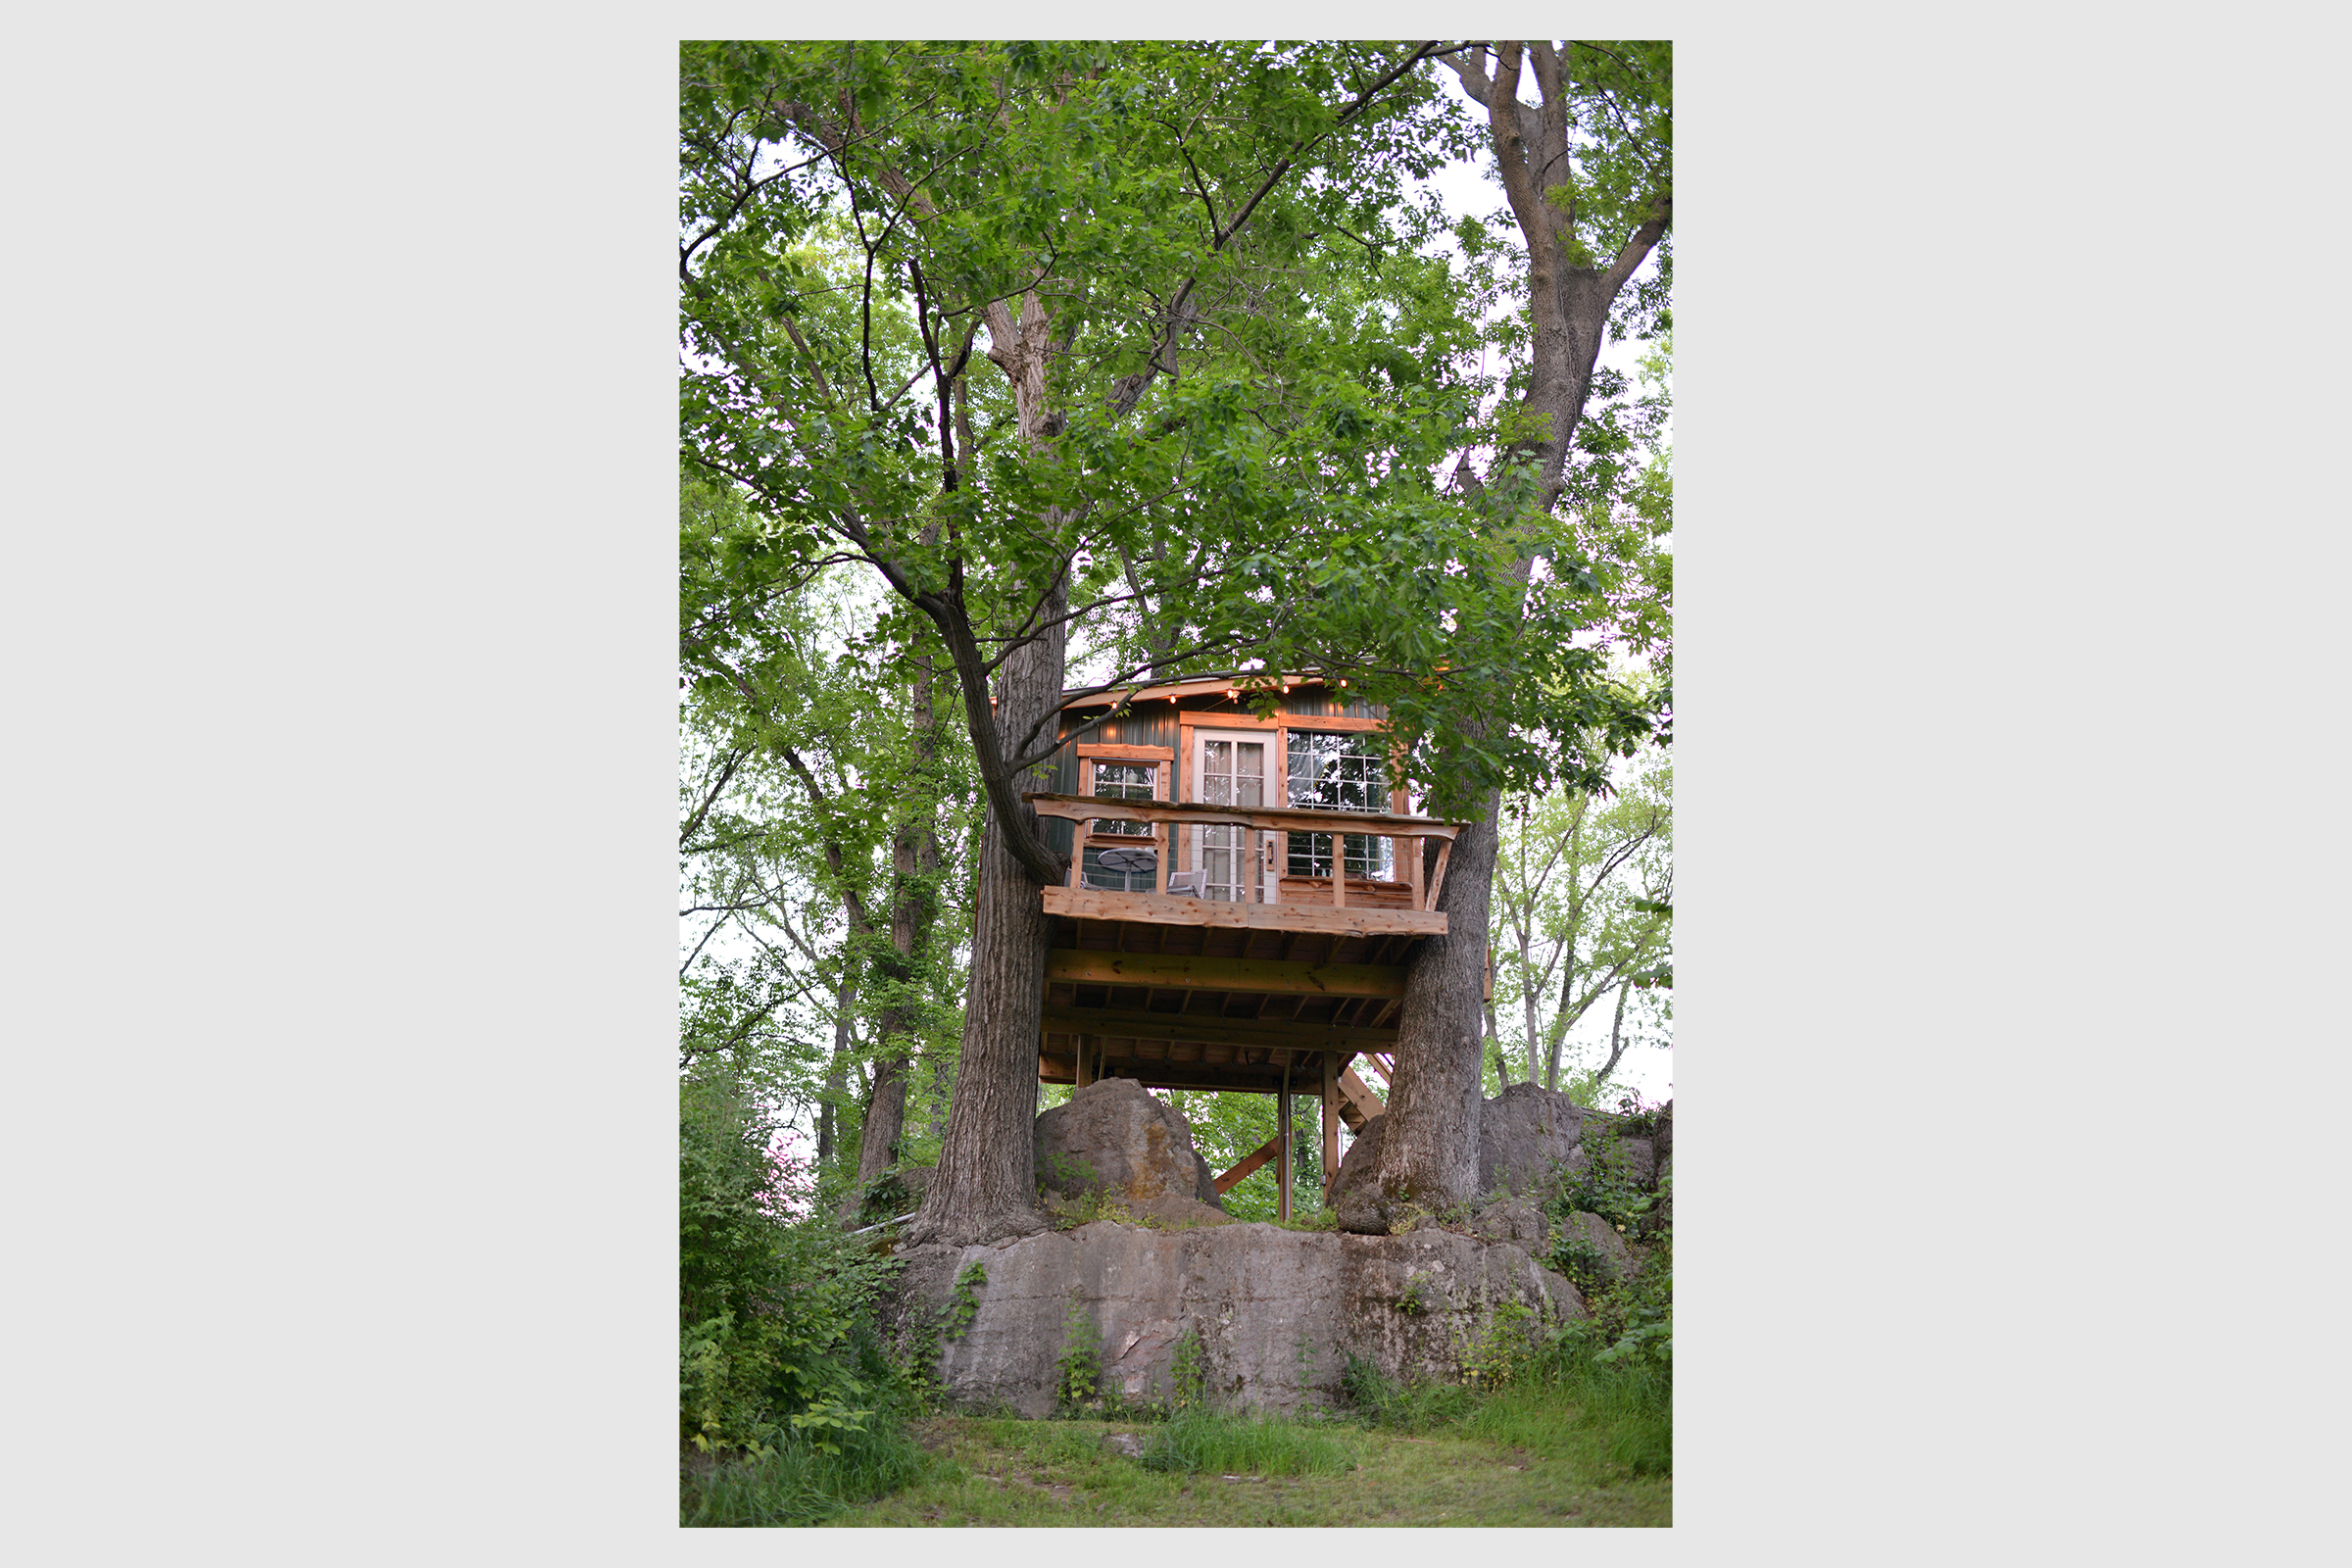 Will Sutherland built this viral treehouse Airbnb by hand.